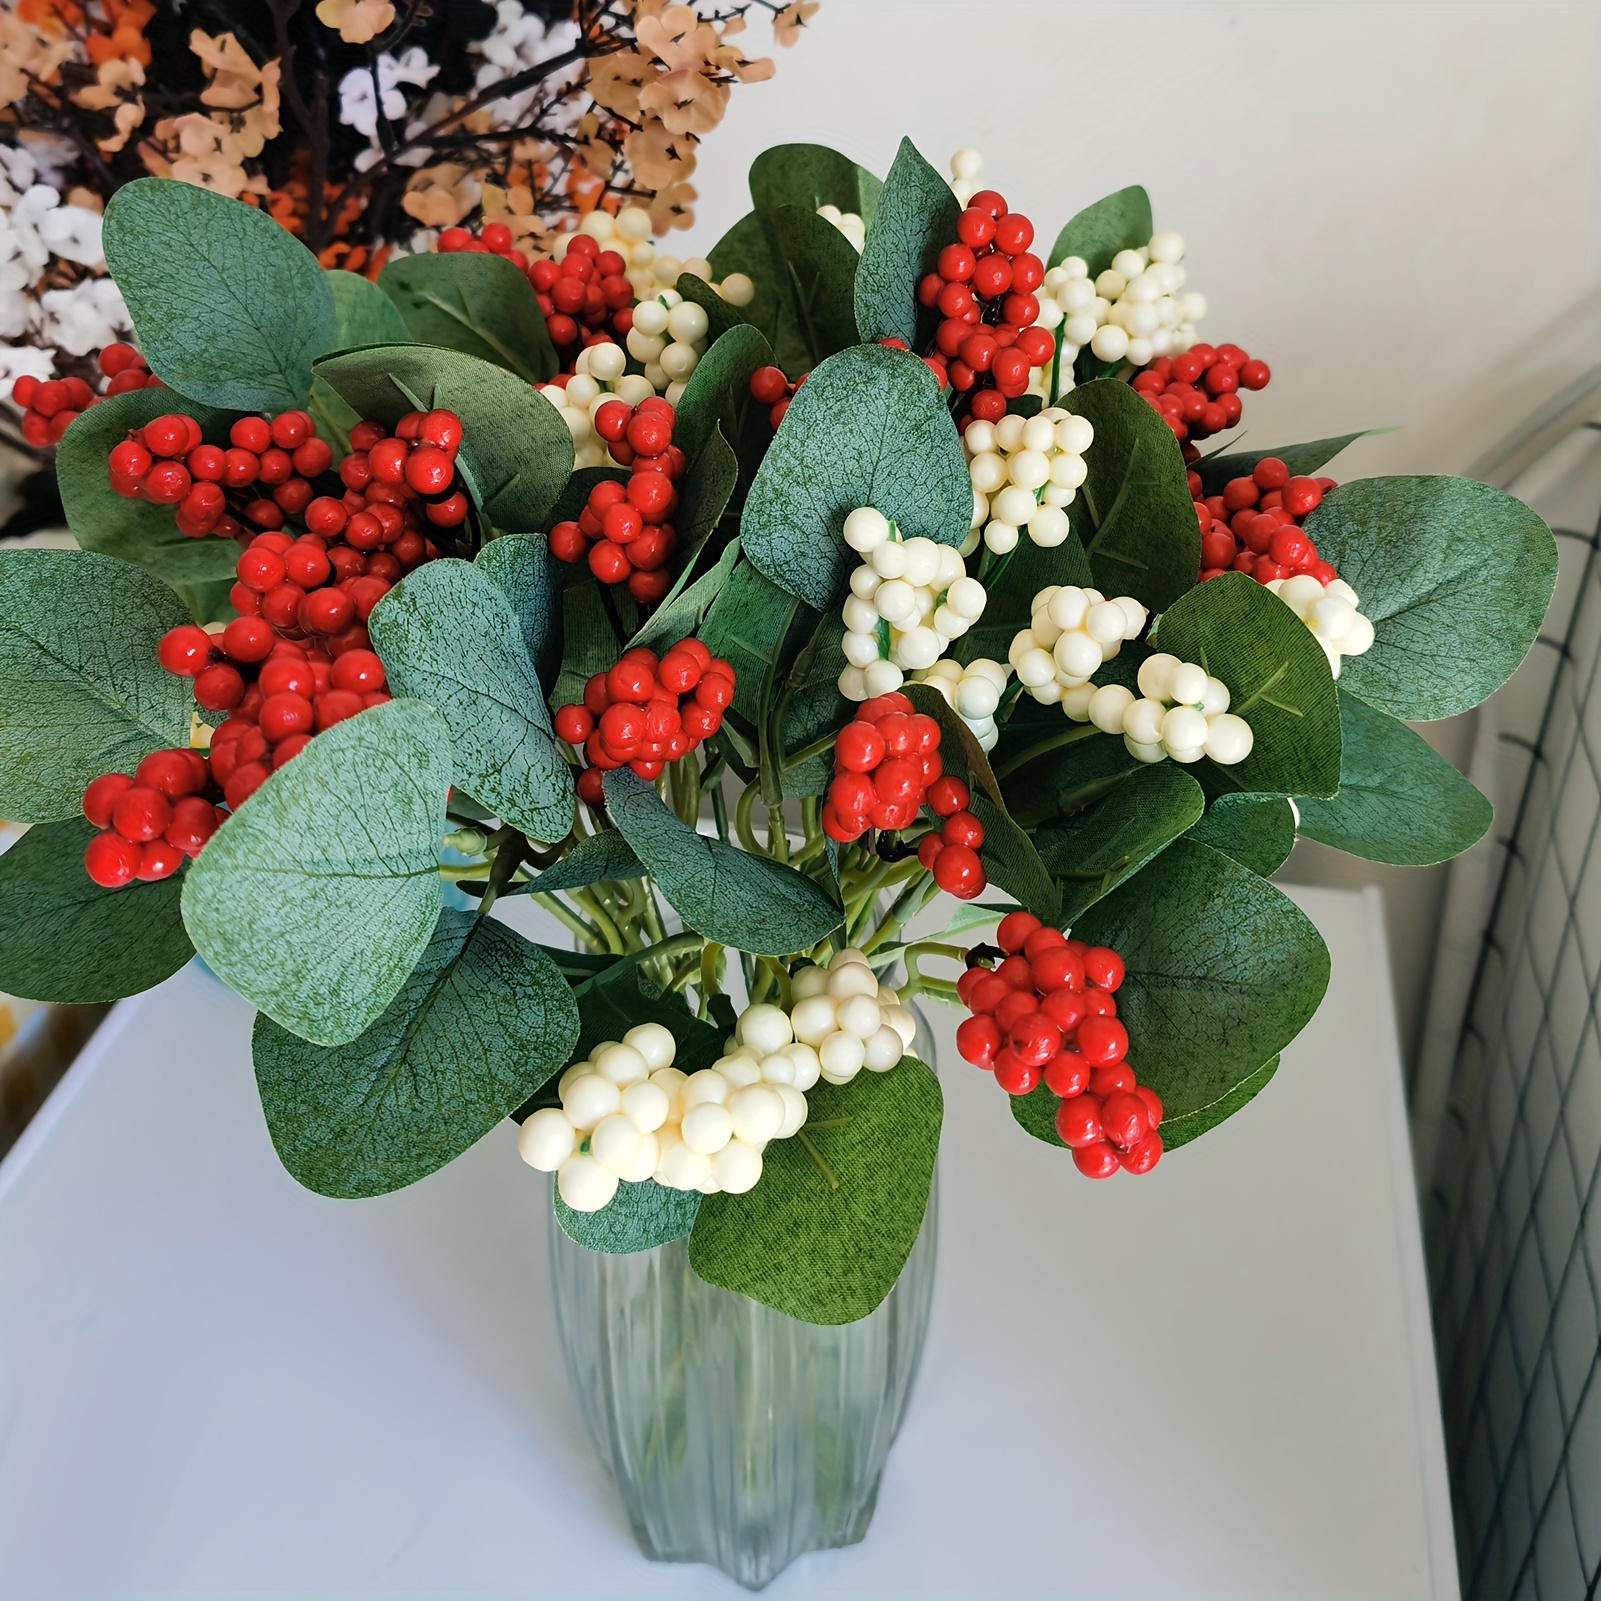 YHDSN Artificial Eucalyptus Stems with Red Berries - 13.78 Faux Greenery  for Christmas Winter Crafts Holiday Home Decor and Floral Arrangements 